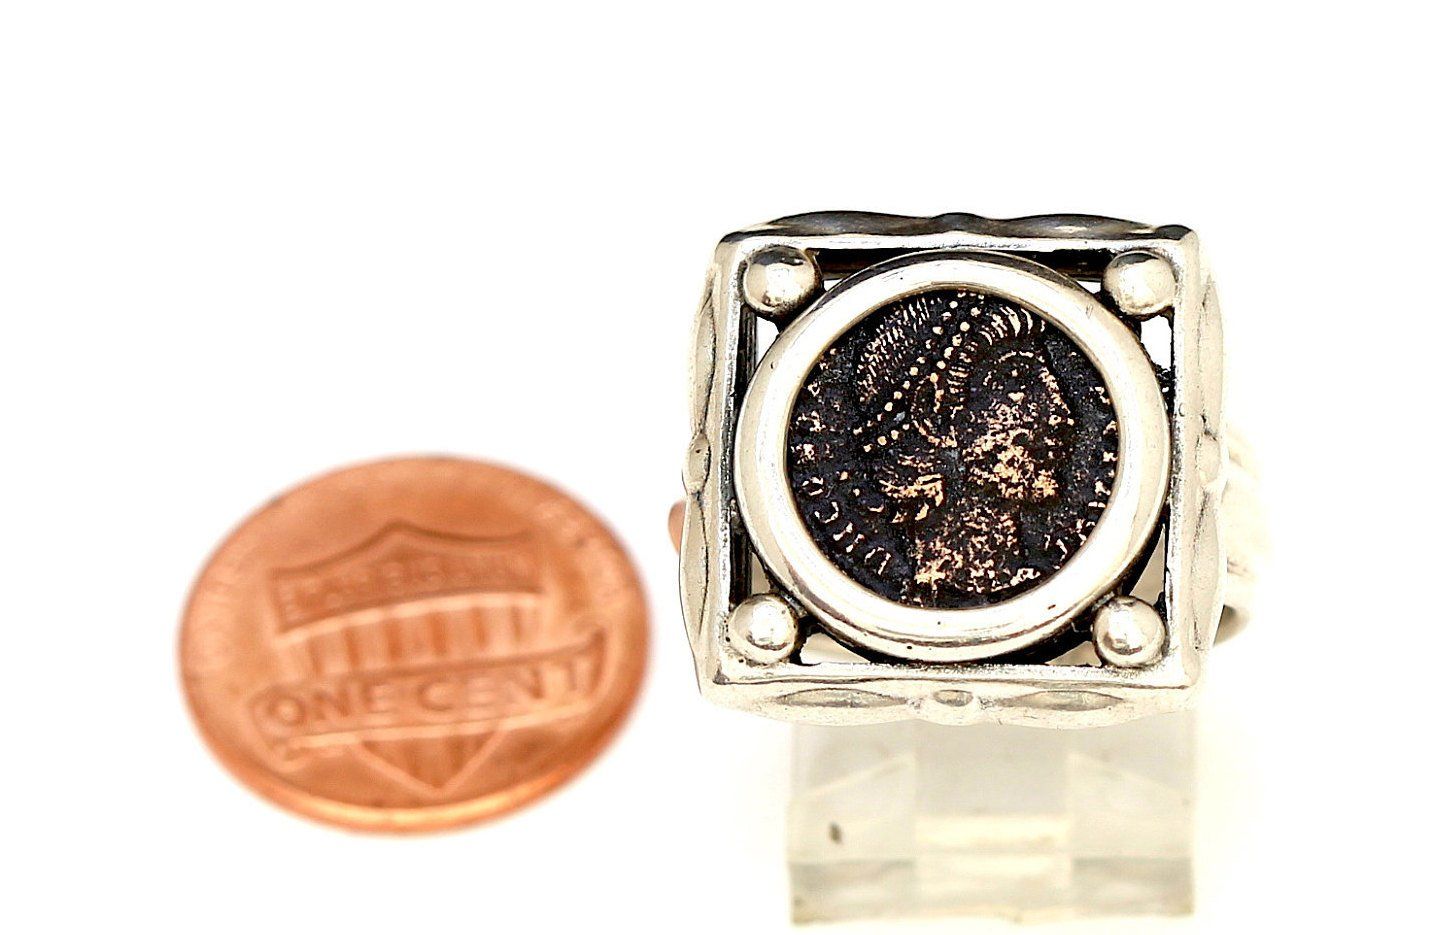 Roman Bronze Coin, Square Sterling Silver Ring, Genuine Ancient Coin, with Certificate 8084 - Erez Ancient Coin Jewelry 